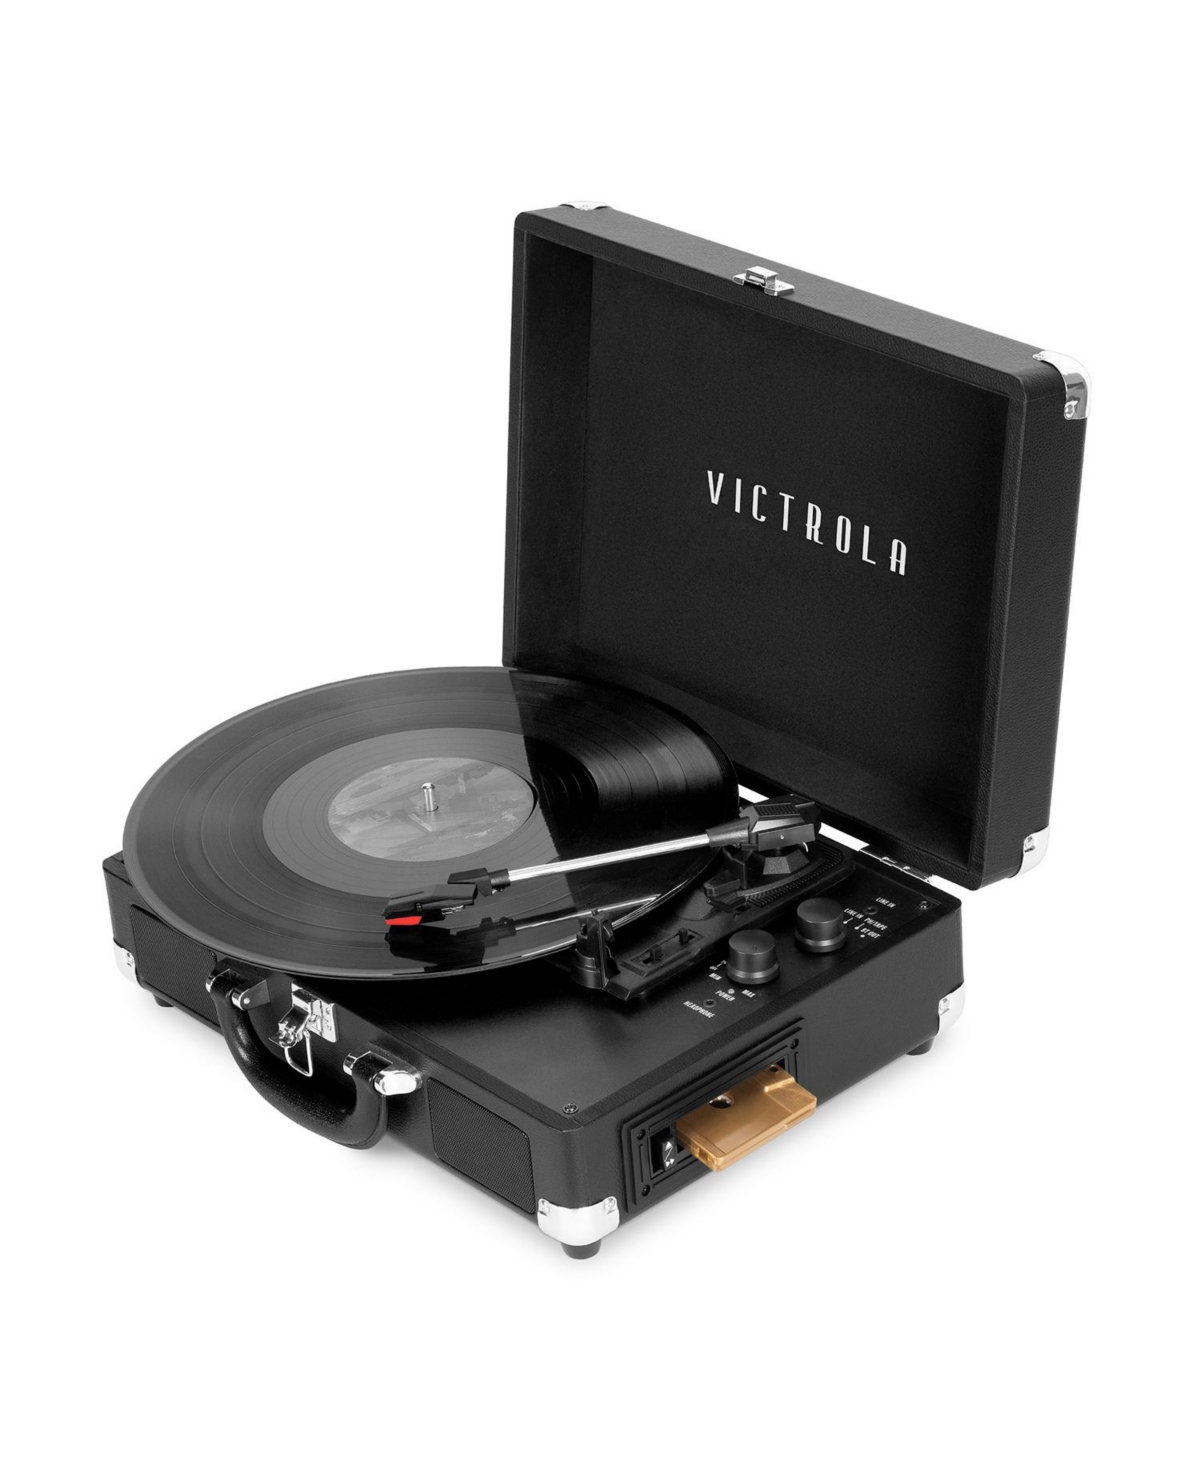 Victrola Suitcase Record Player With 3-speed Turntable In Black